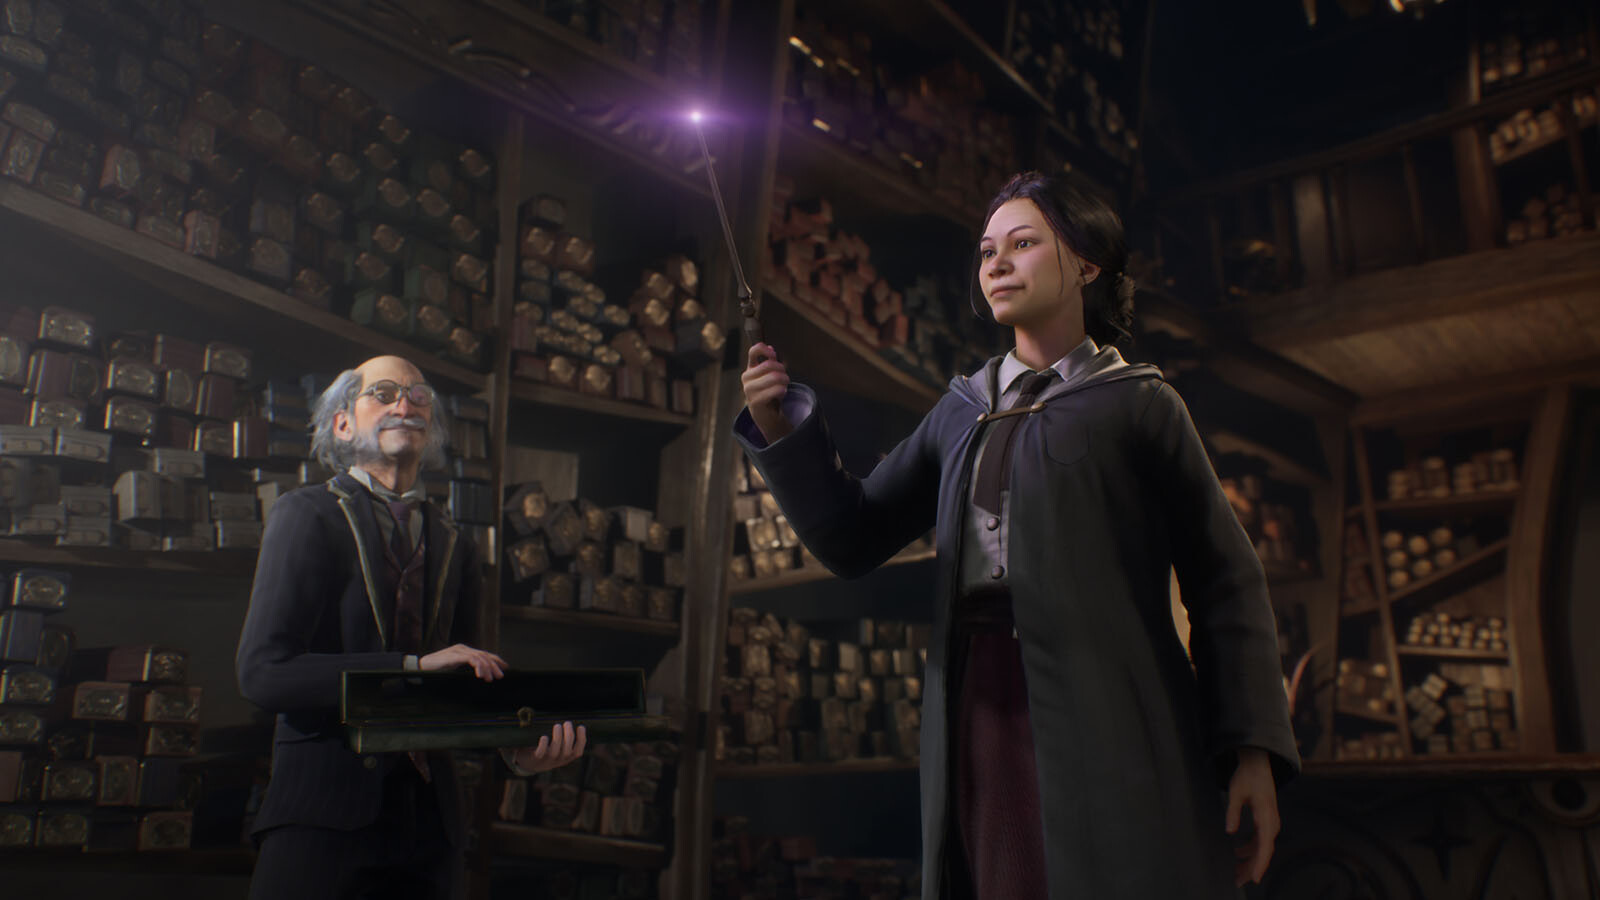 Get your Hogwarts Legacy PC Steam Key Now / Deluxe Early Access from Feb  7th - Games Planet